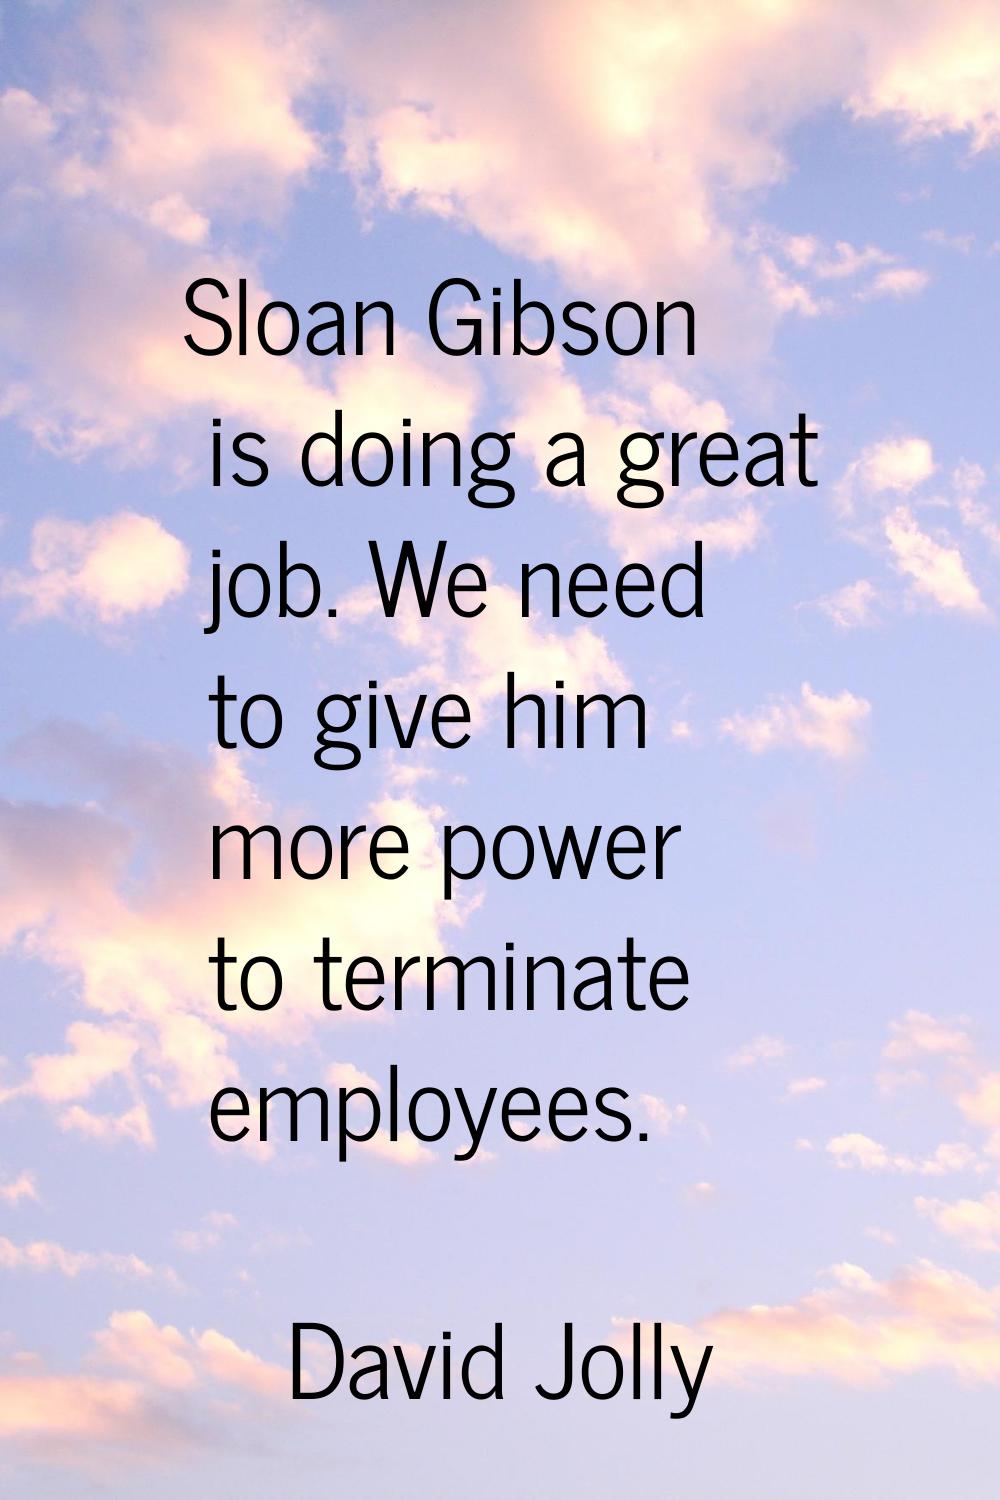 Sloan Gibson is doing a great job. We need to give him more power to terminate employees.